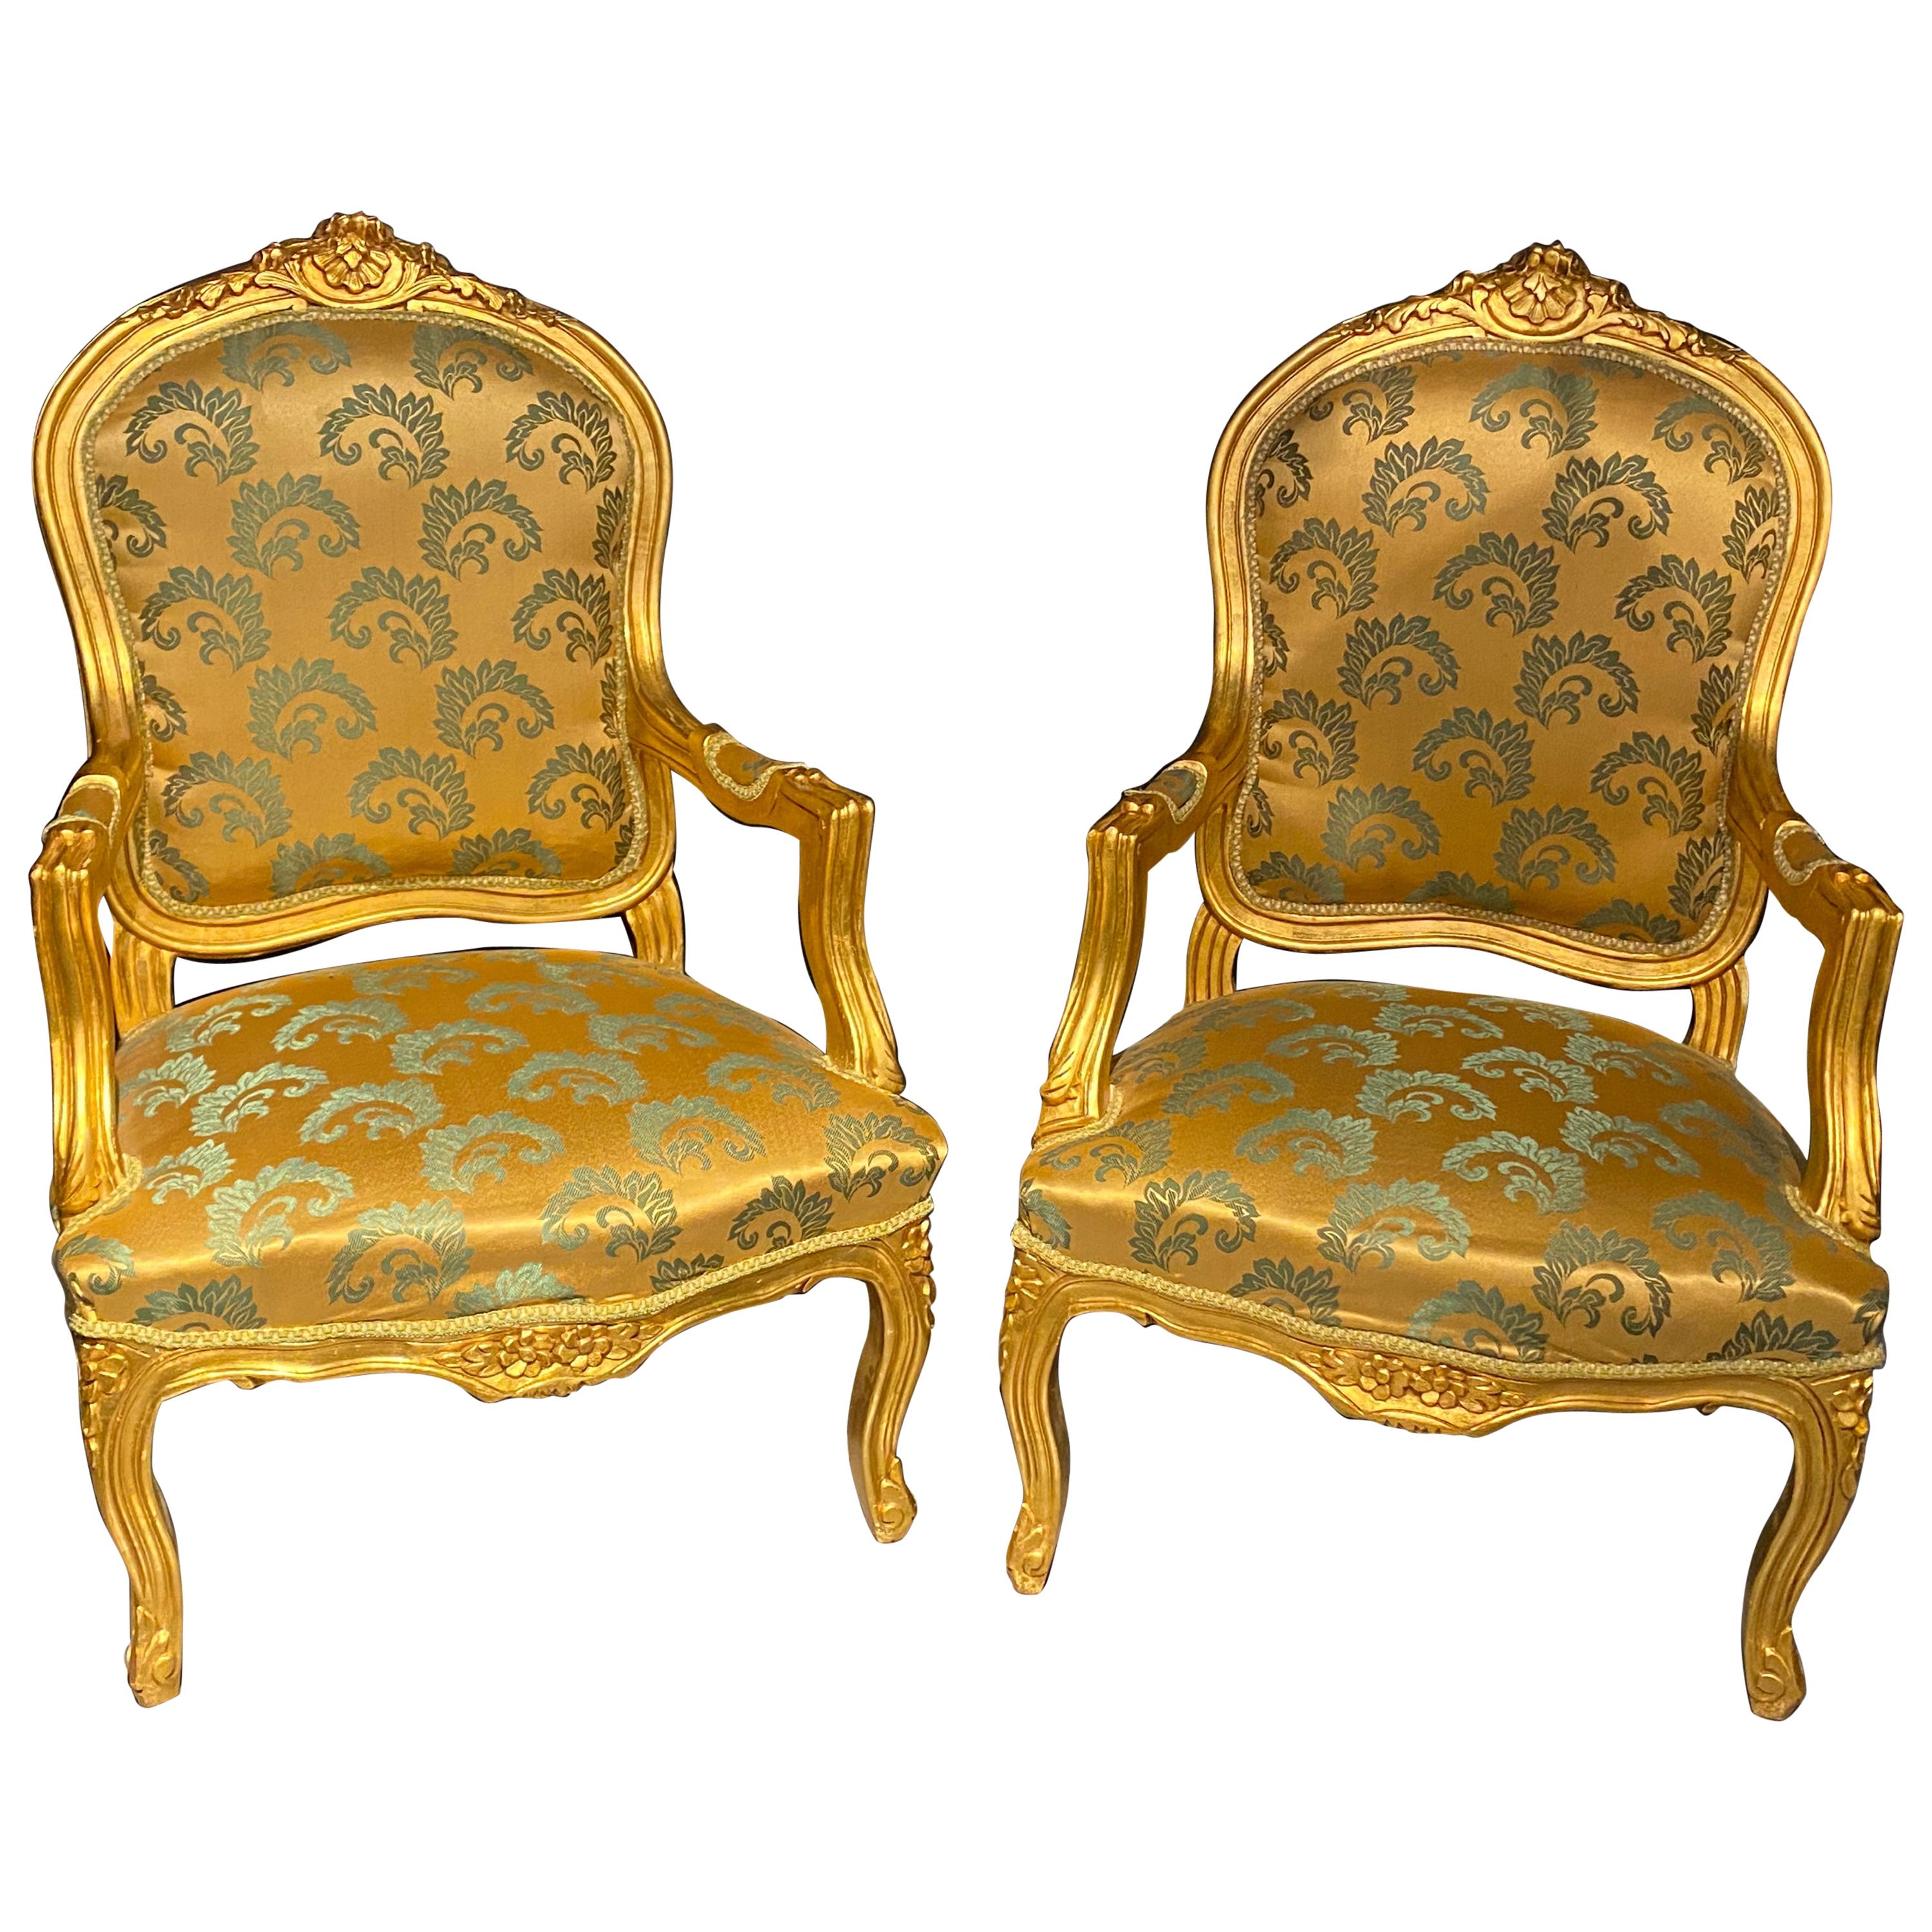 Pair of Louis XV Style Giltwood Fauteuils or Armchairs